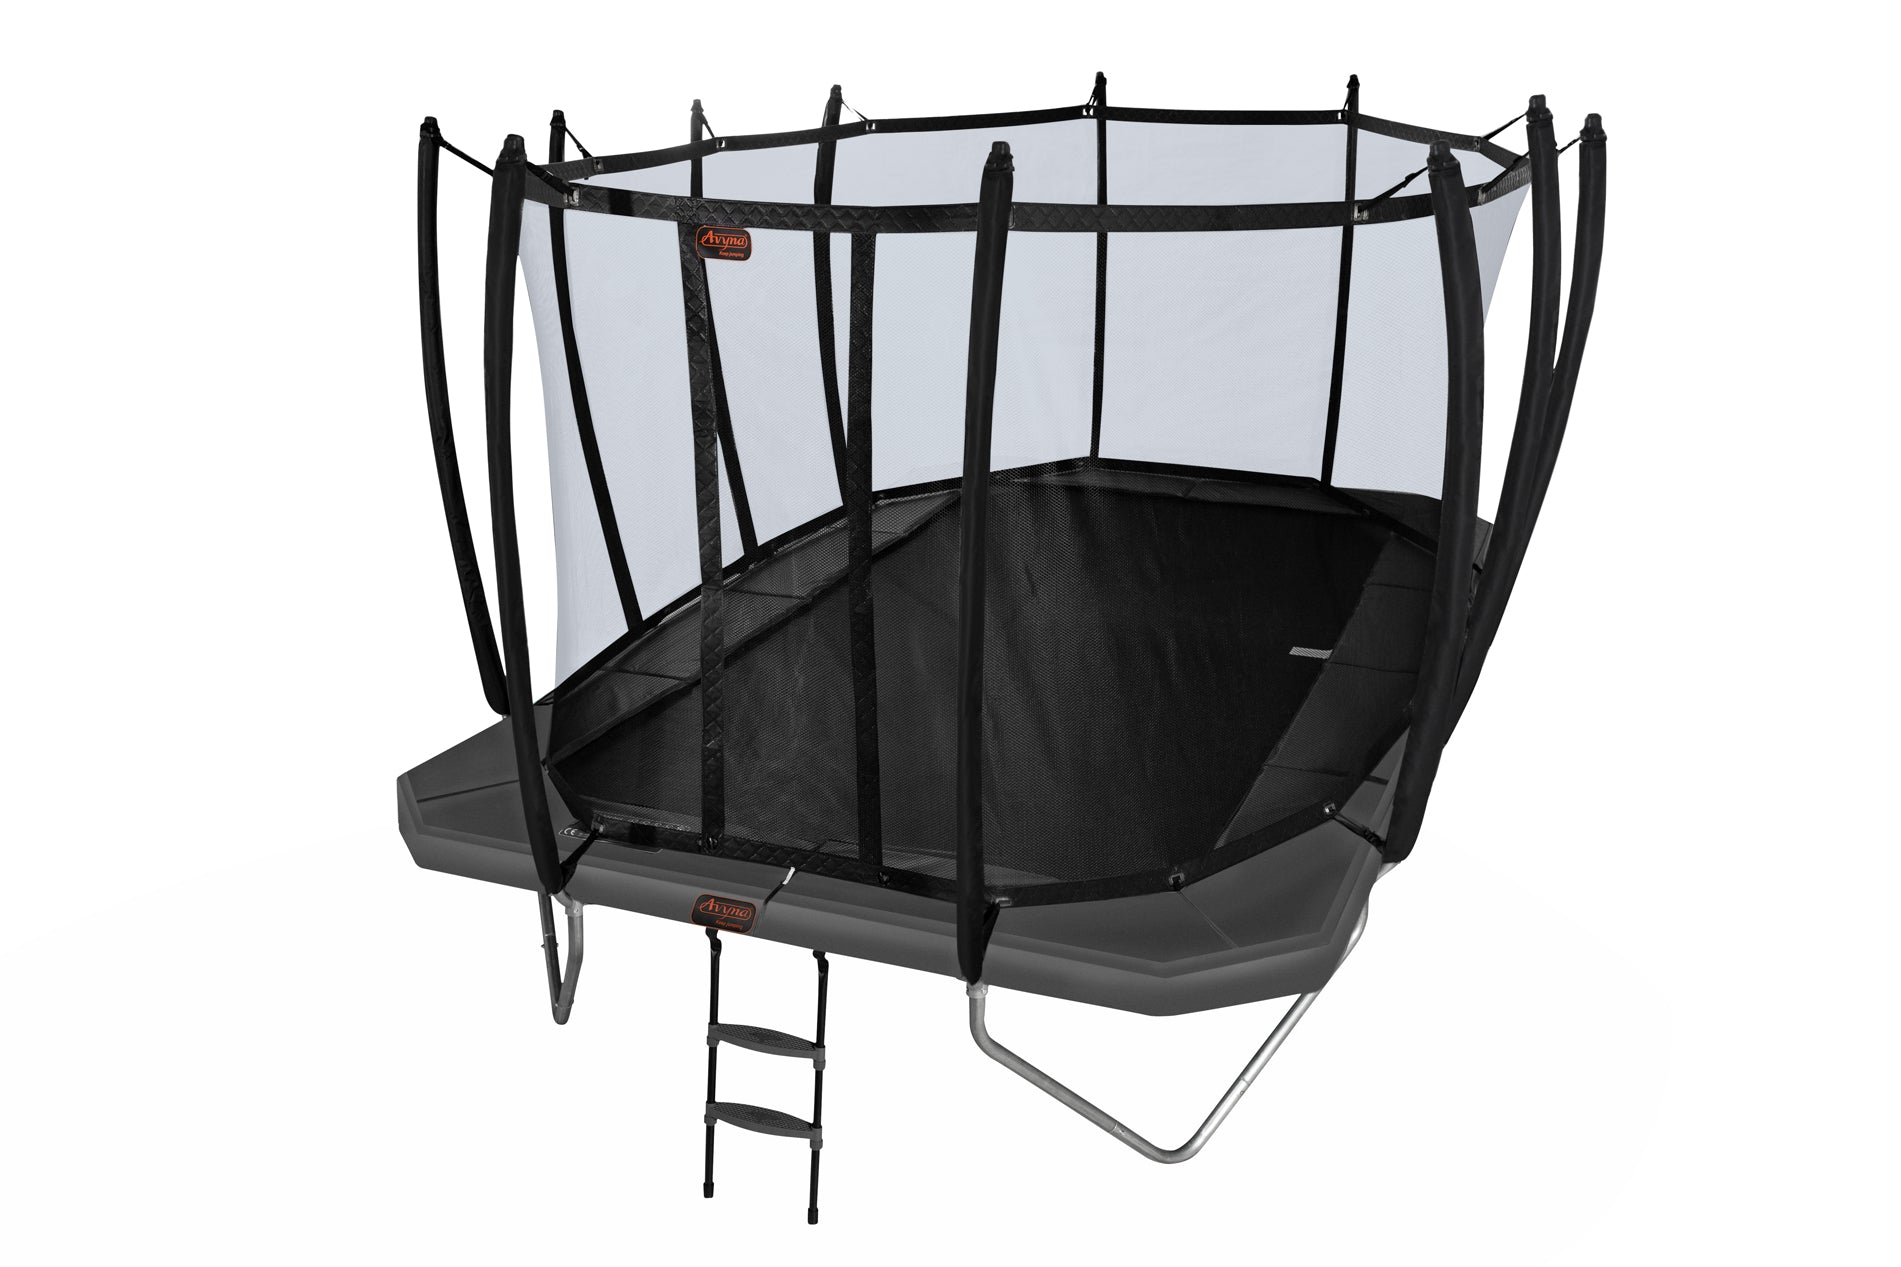 10'x17' Rectangle Above Ground Trampoline with Safety Net